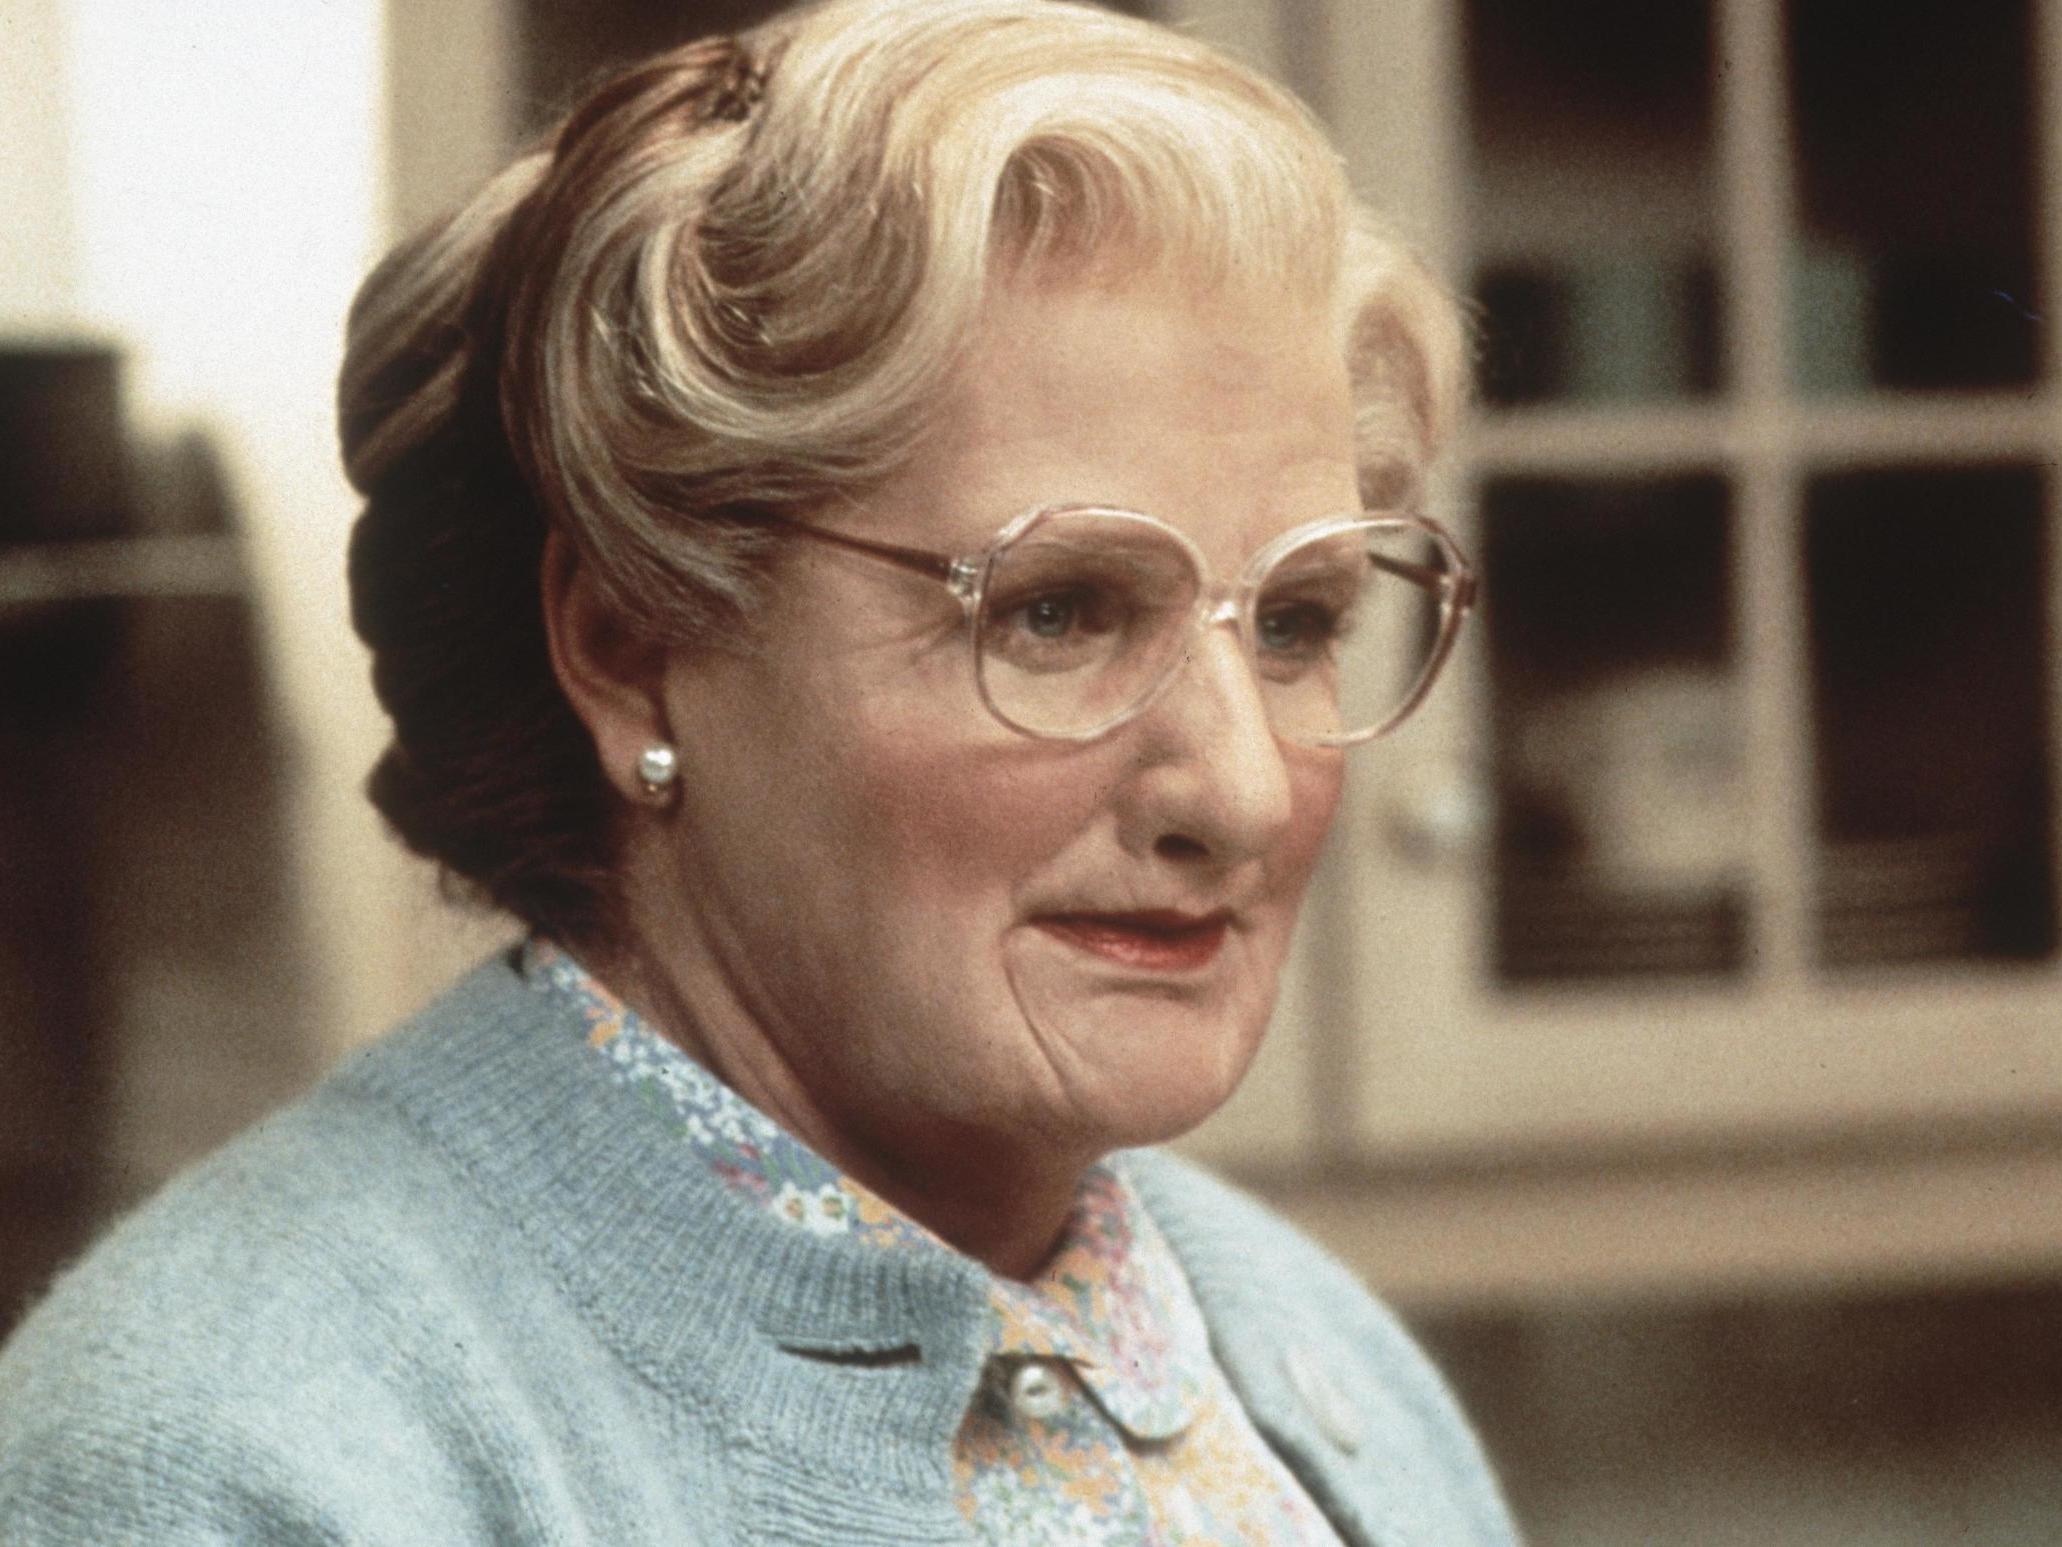 Doubtfire showcases humour relies obvious simplistic otherwise talents